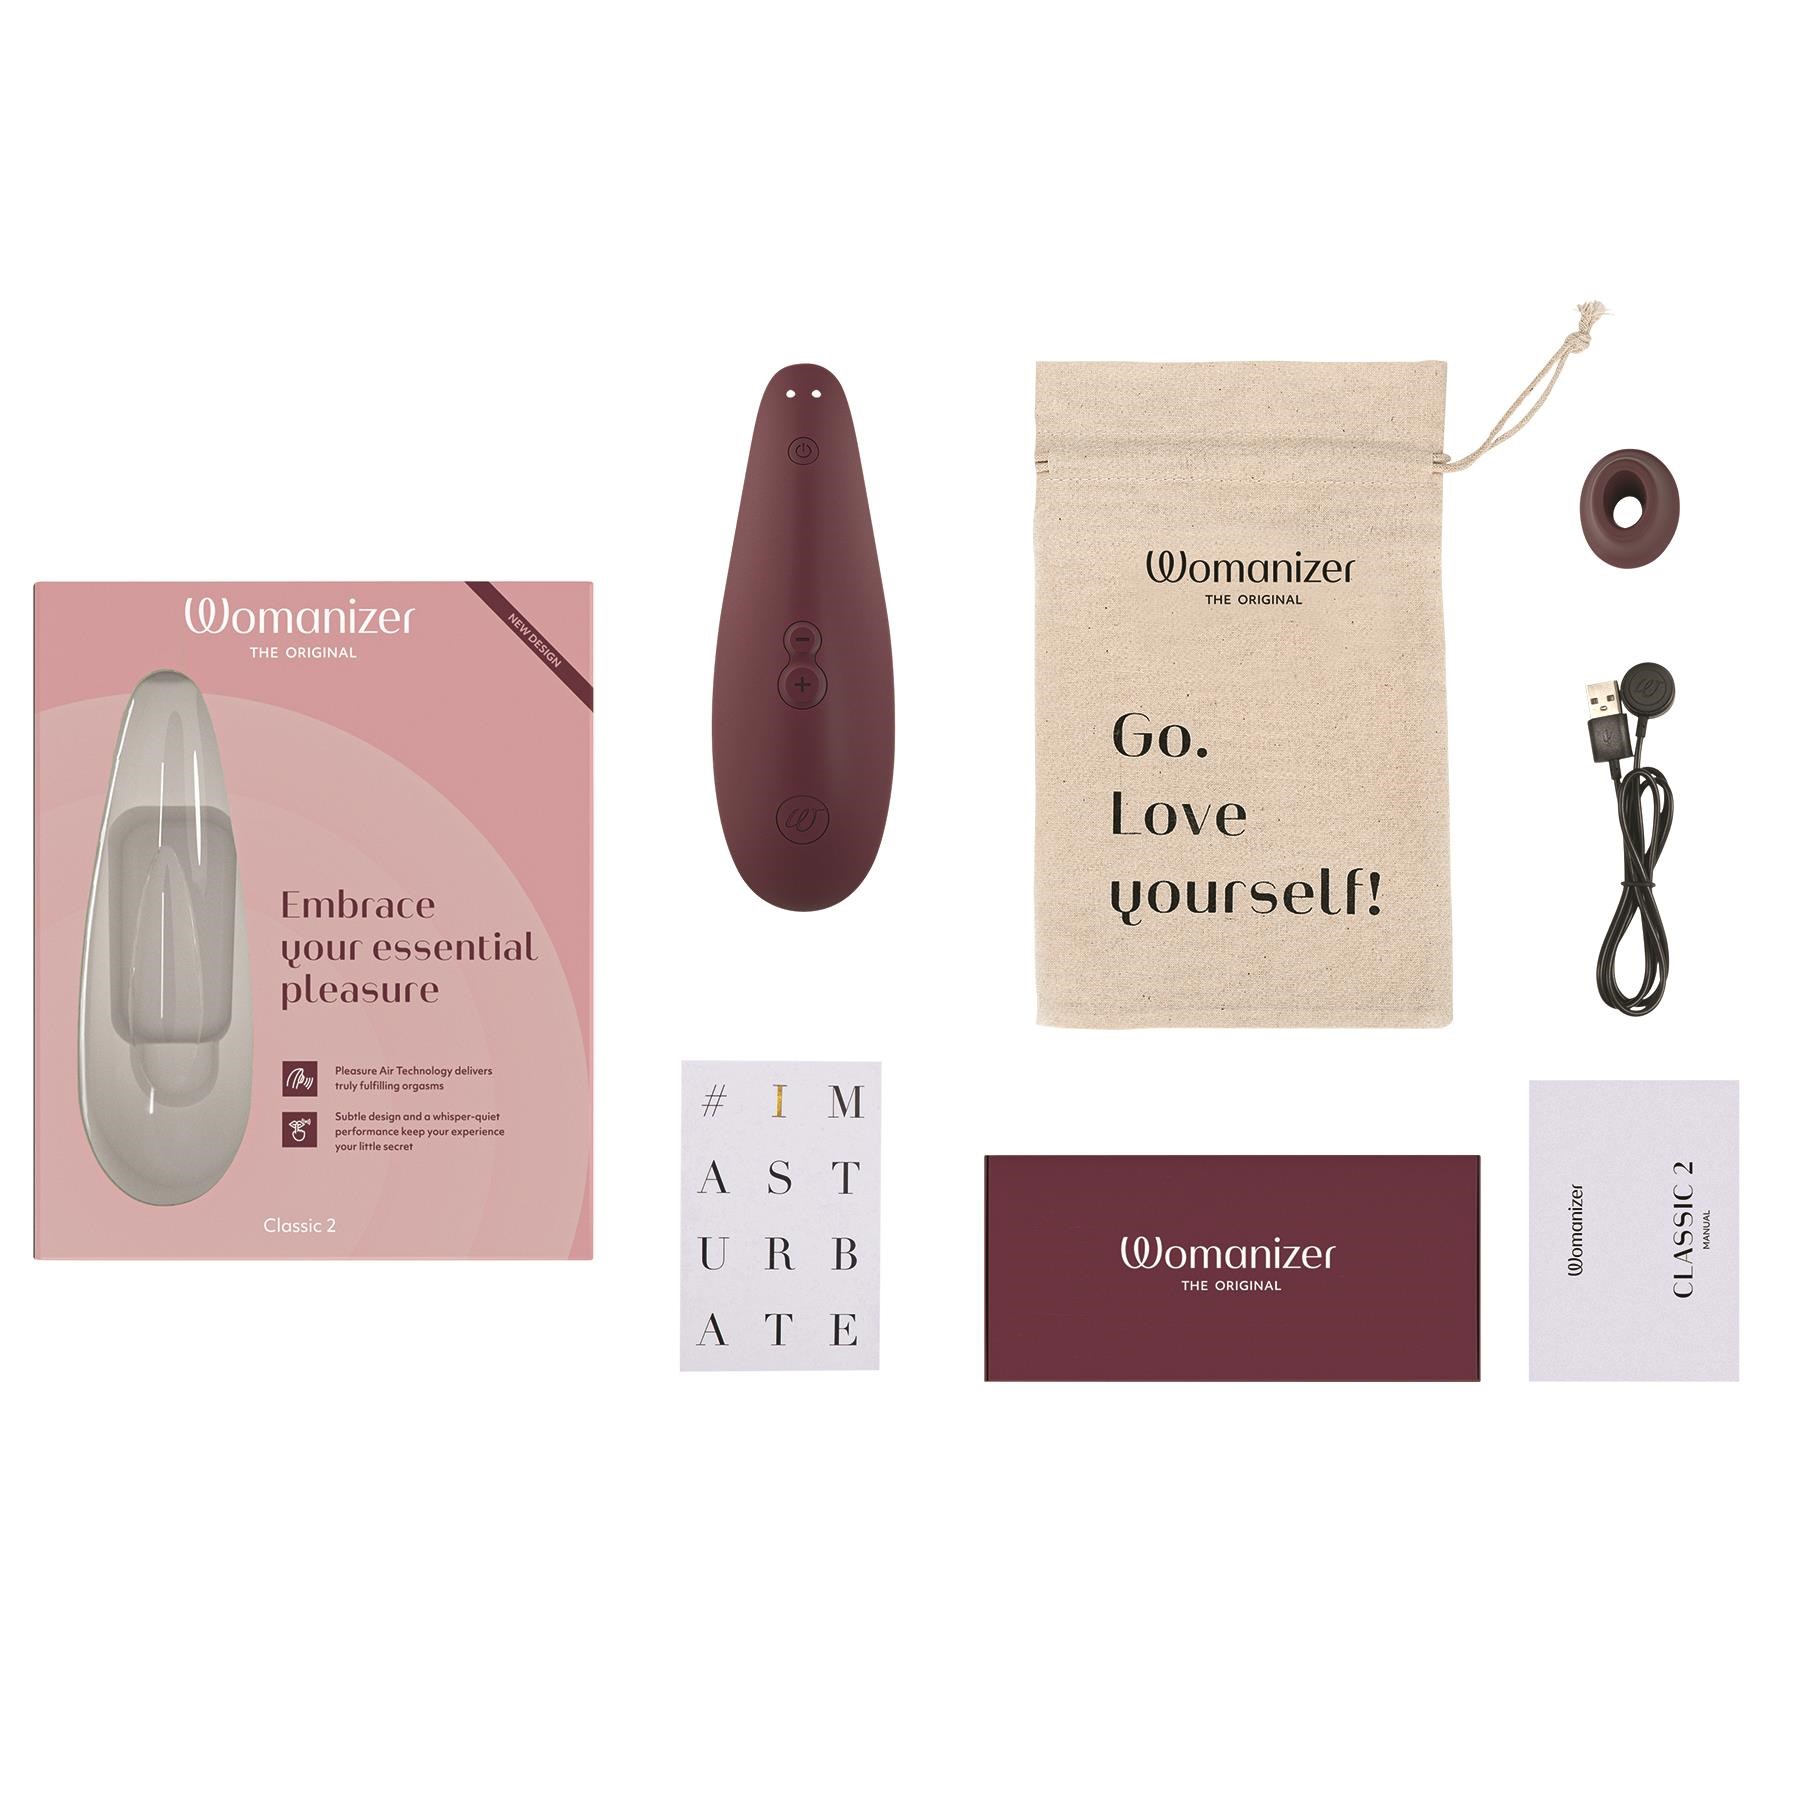 Womanizer Classic 2 Clitoral Stimulator Open Box Showing All Components - Burgundy